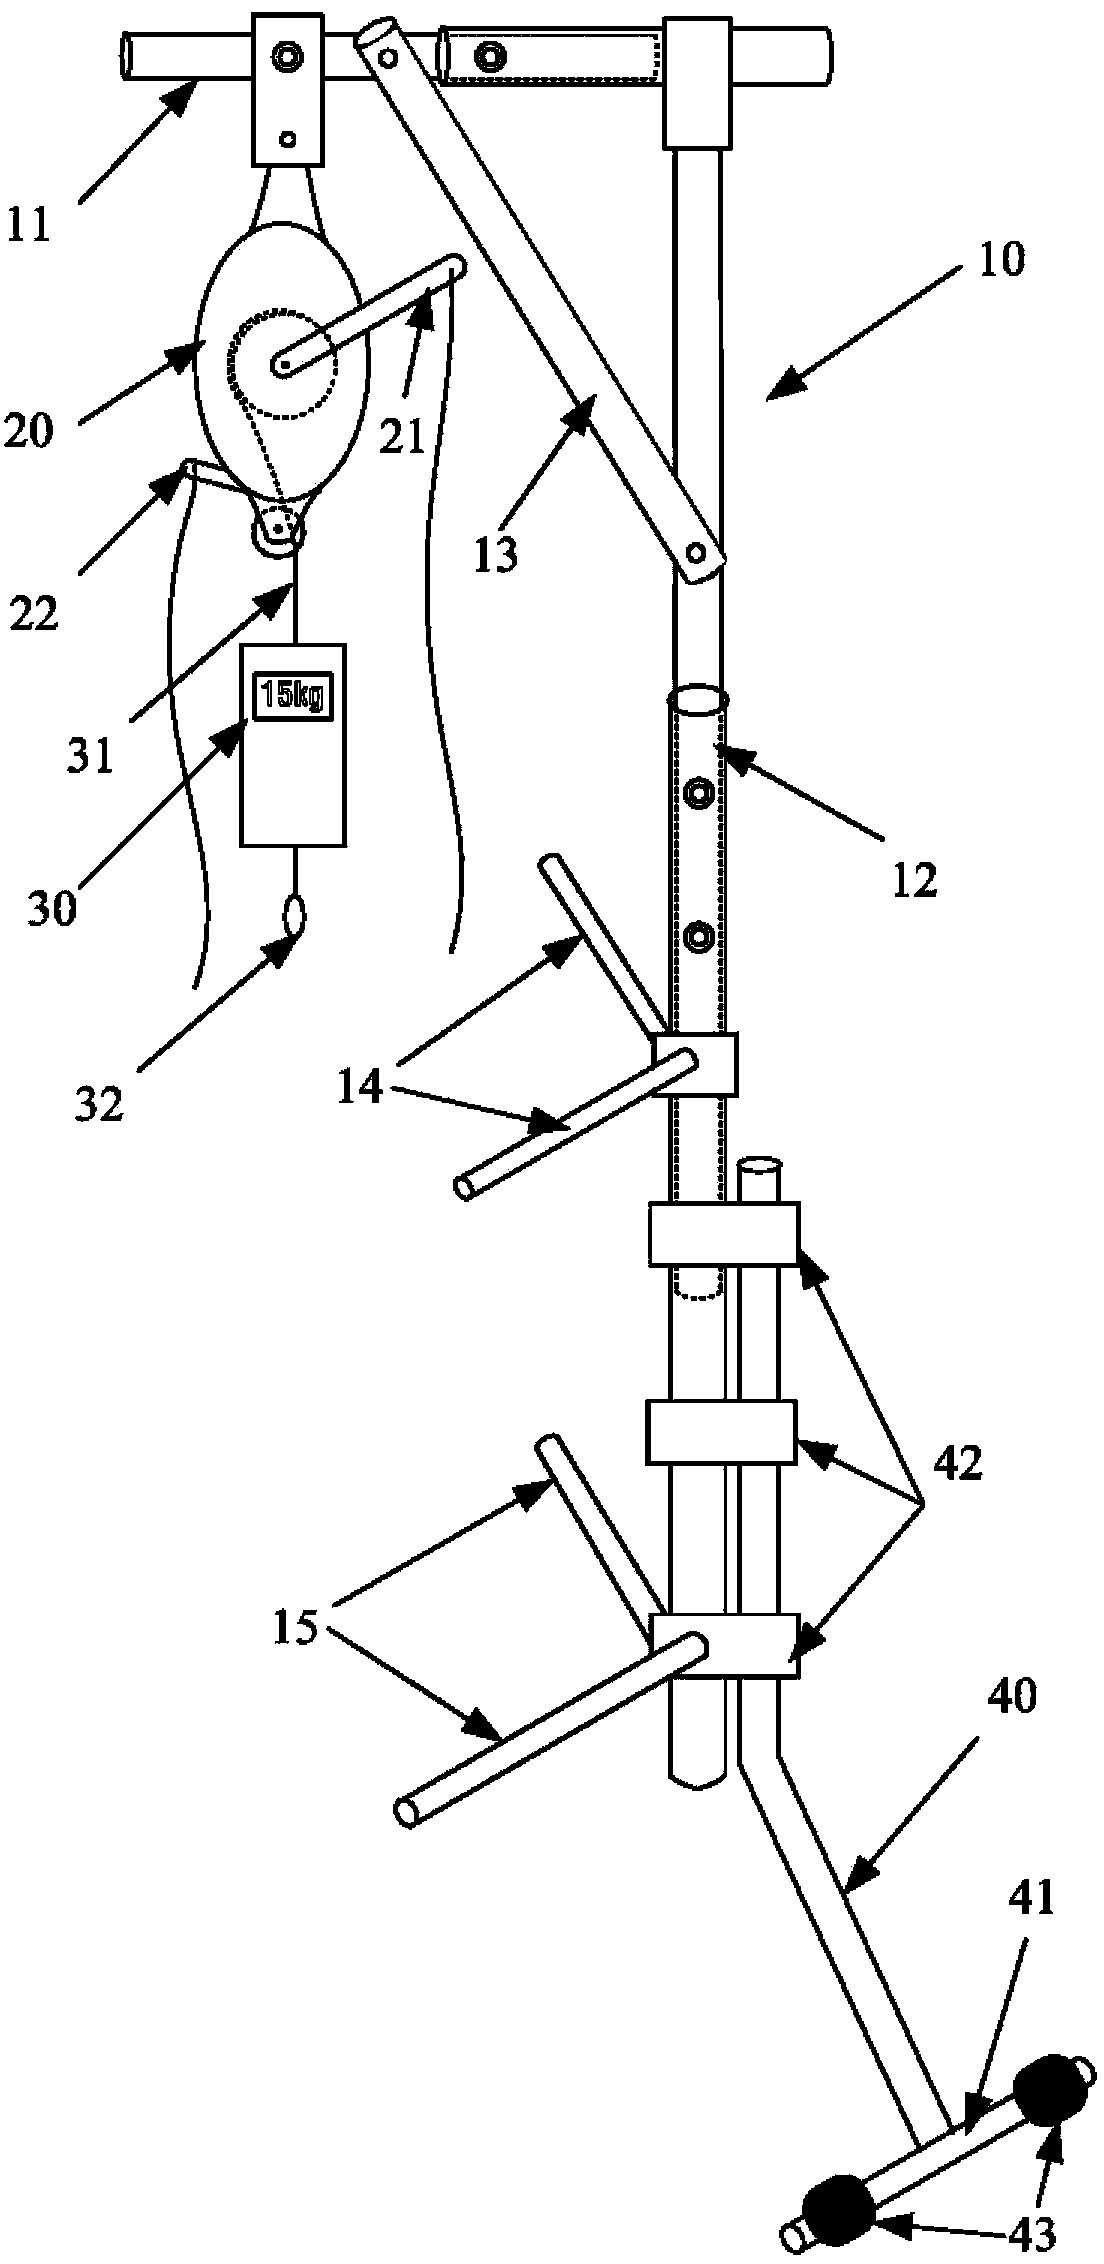 Spinal deformity sitting-position traction device without counter weight and with traction force visualized